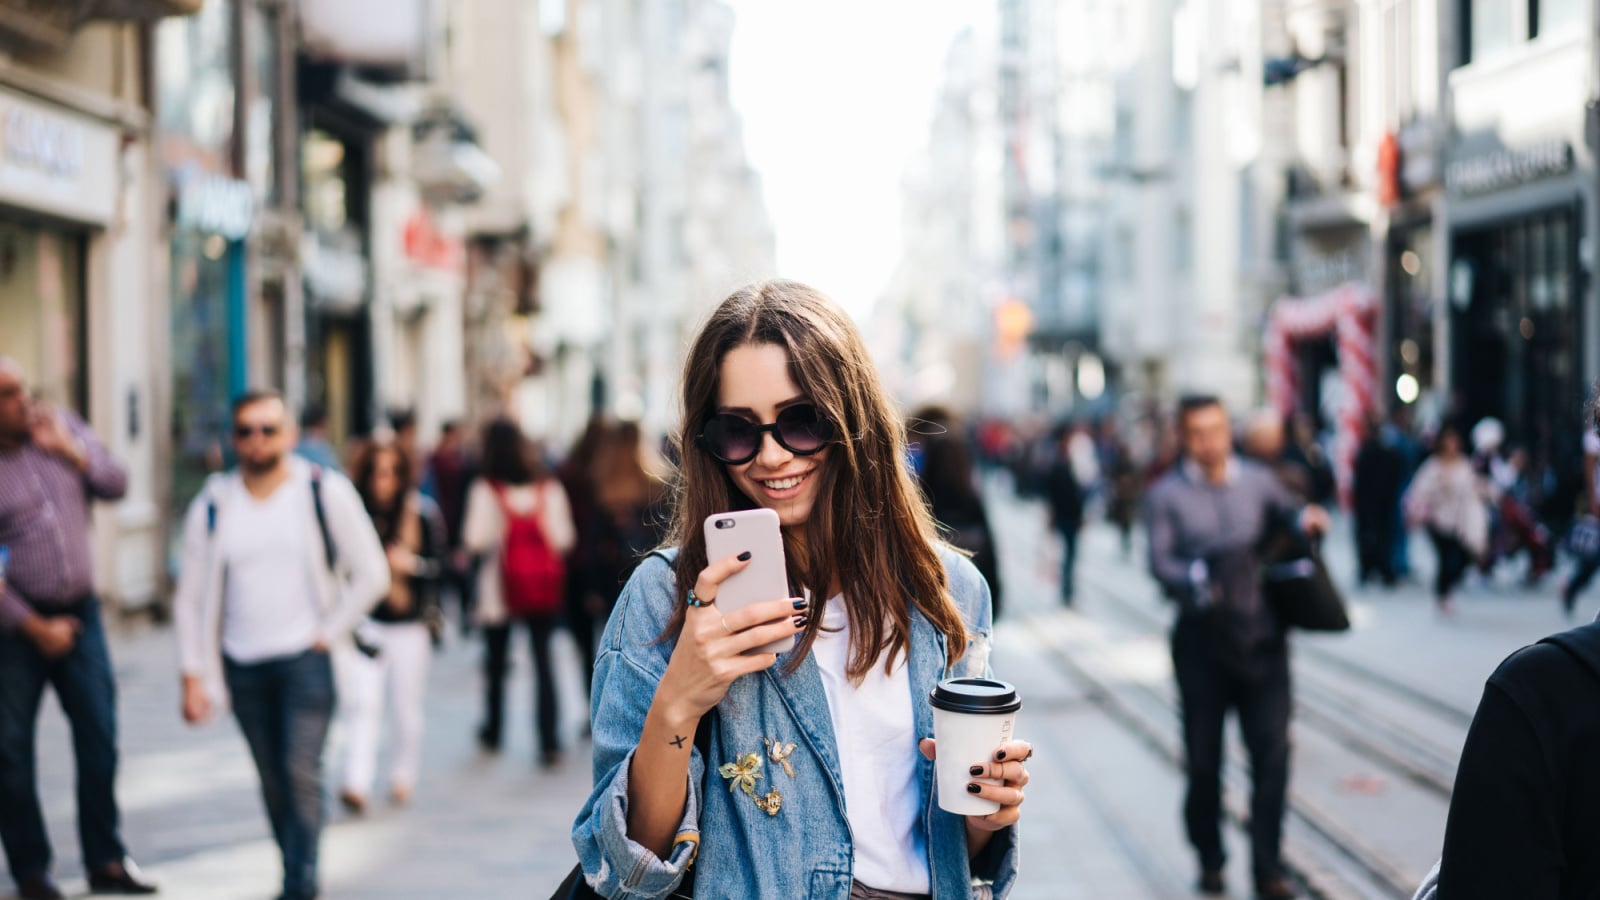 Beautiful smiling woman walking on crowded city street from work with coffee cup and texting on mobile phone